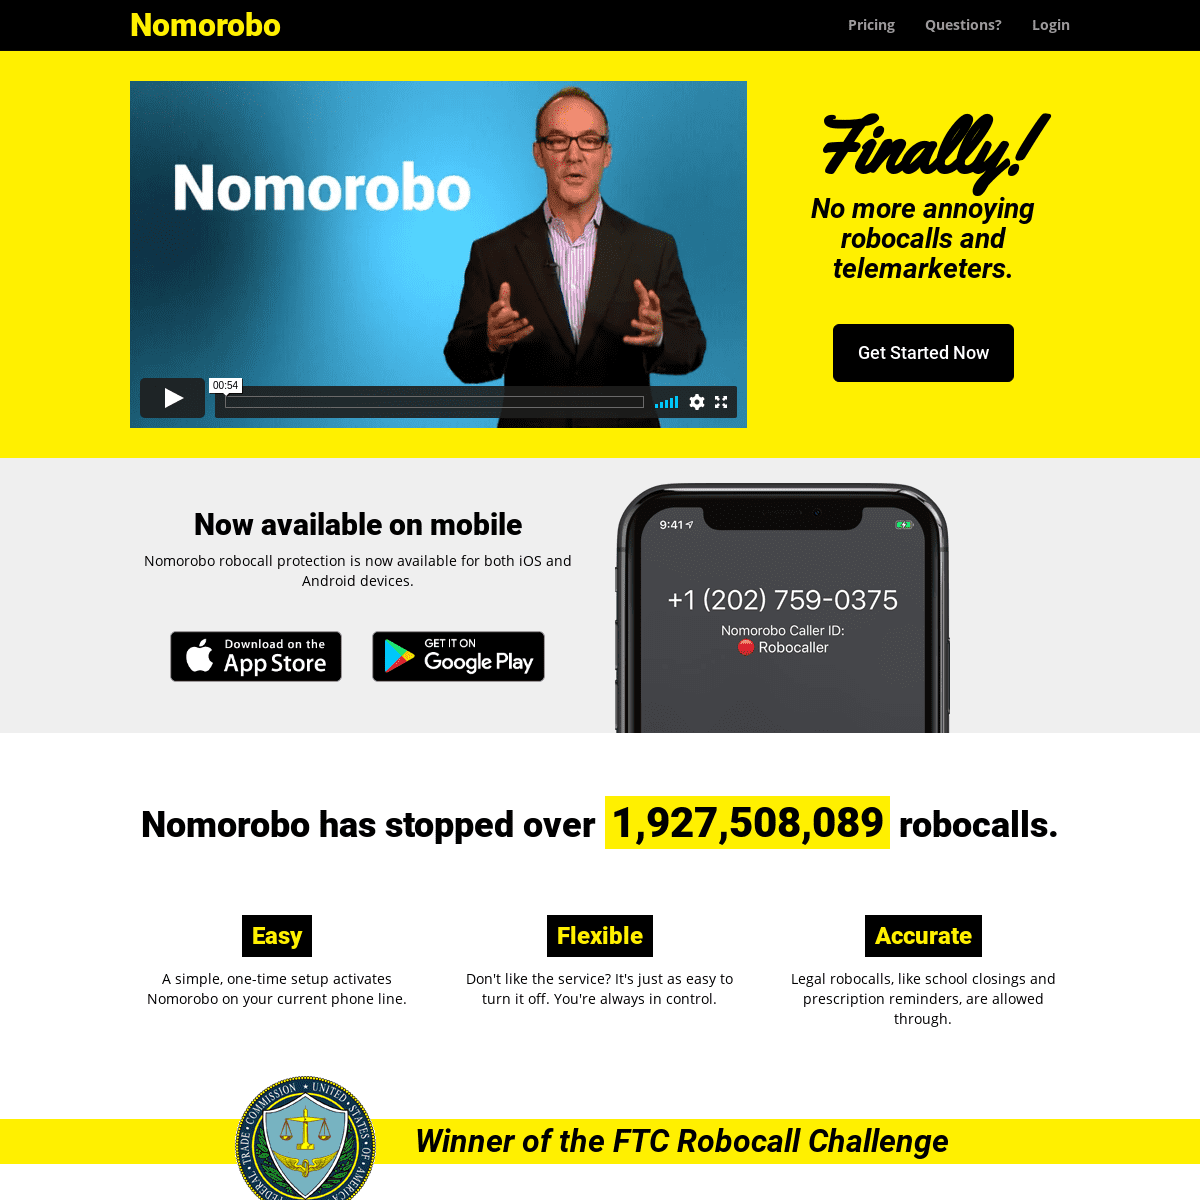 Stop robocalls and telemarketers with Nomorobo